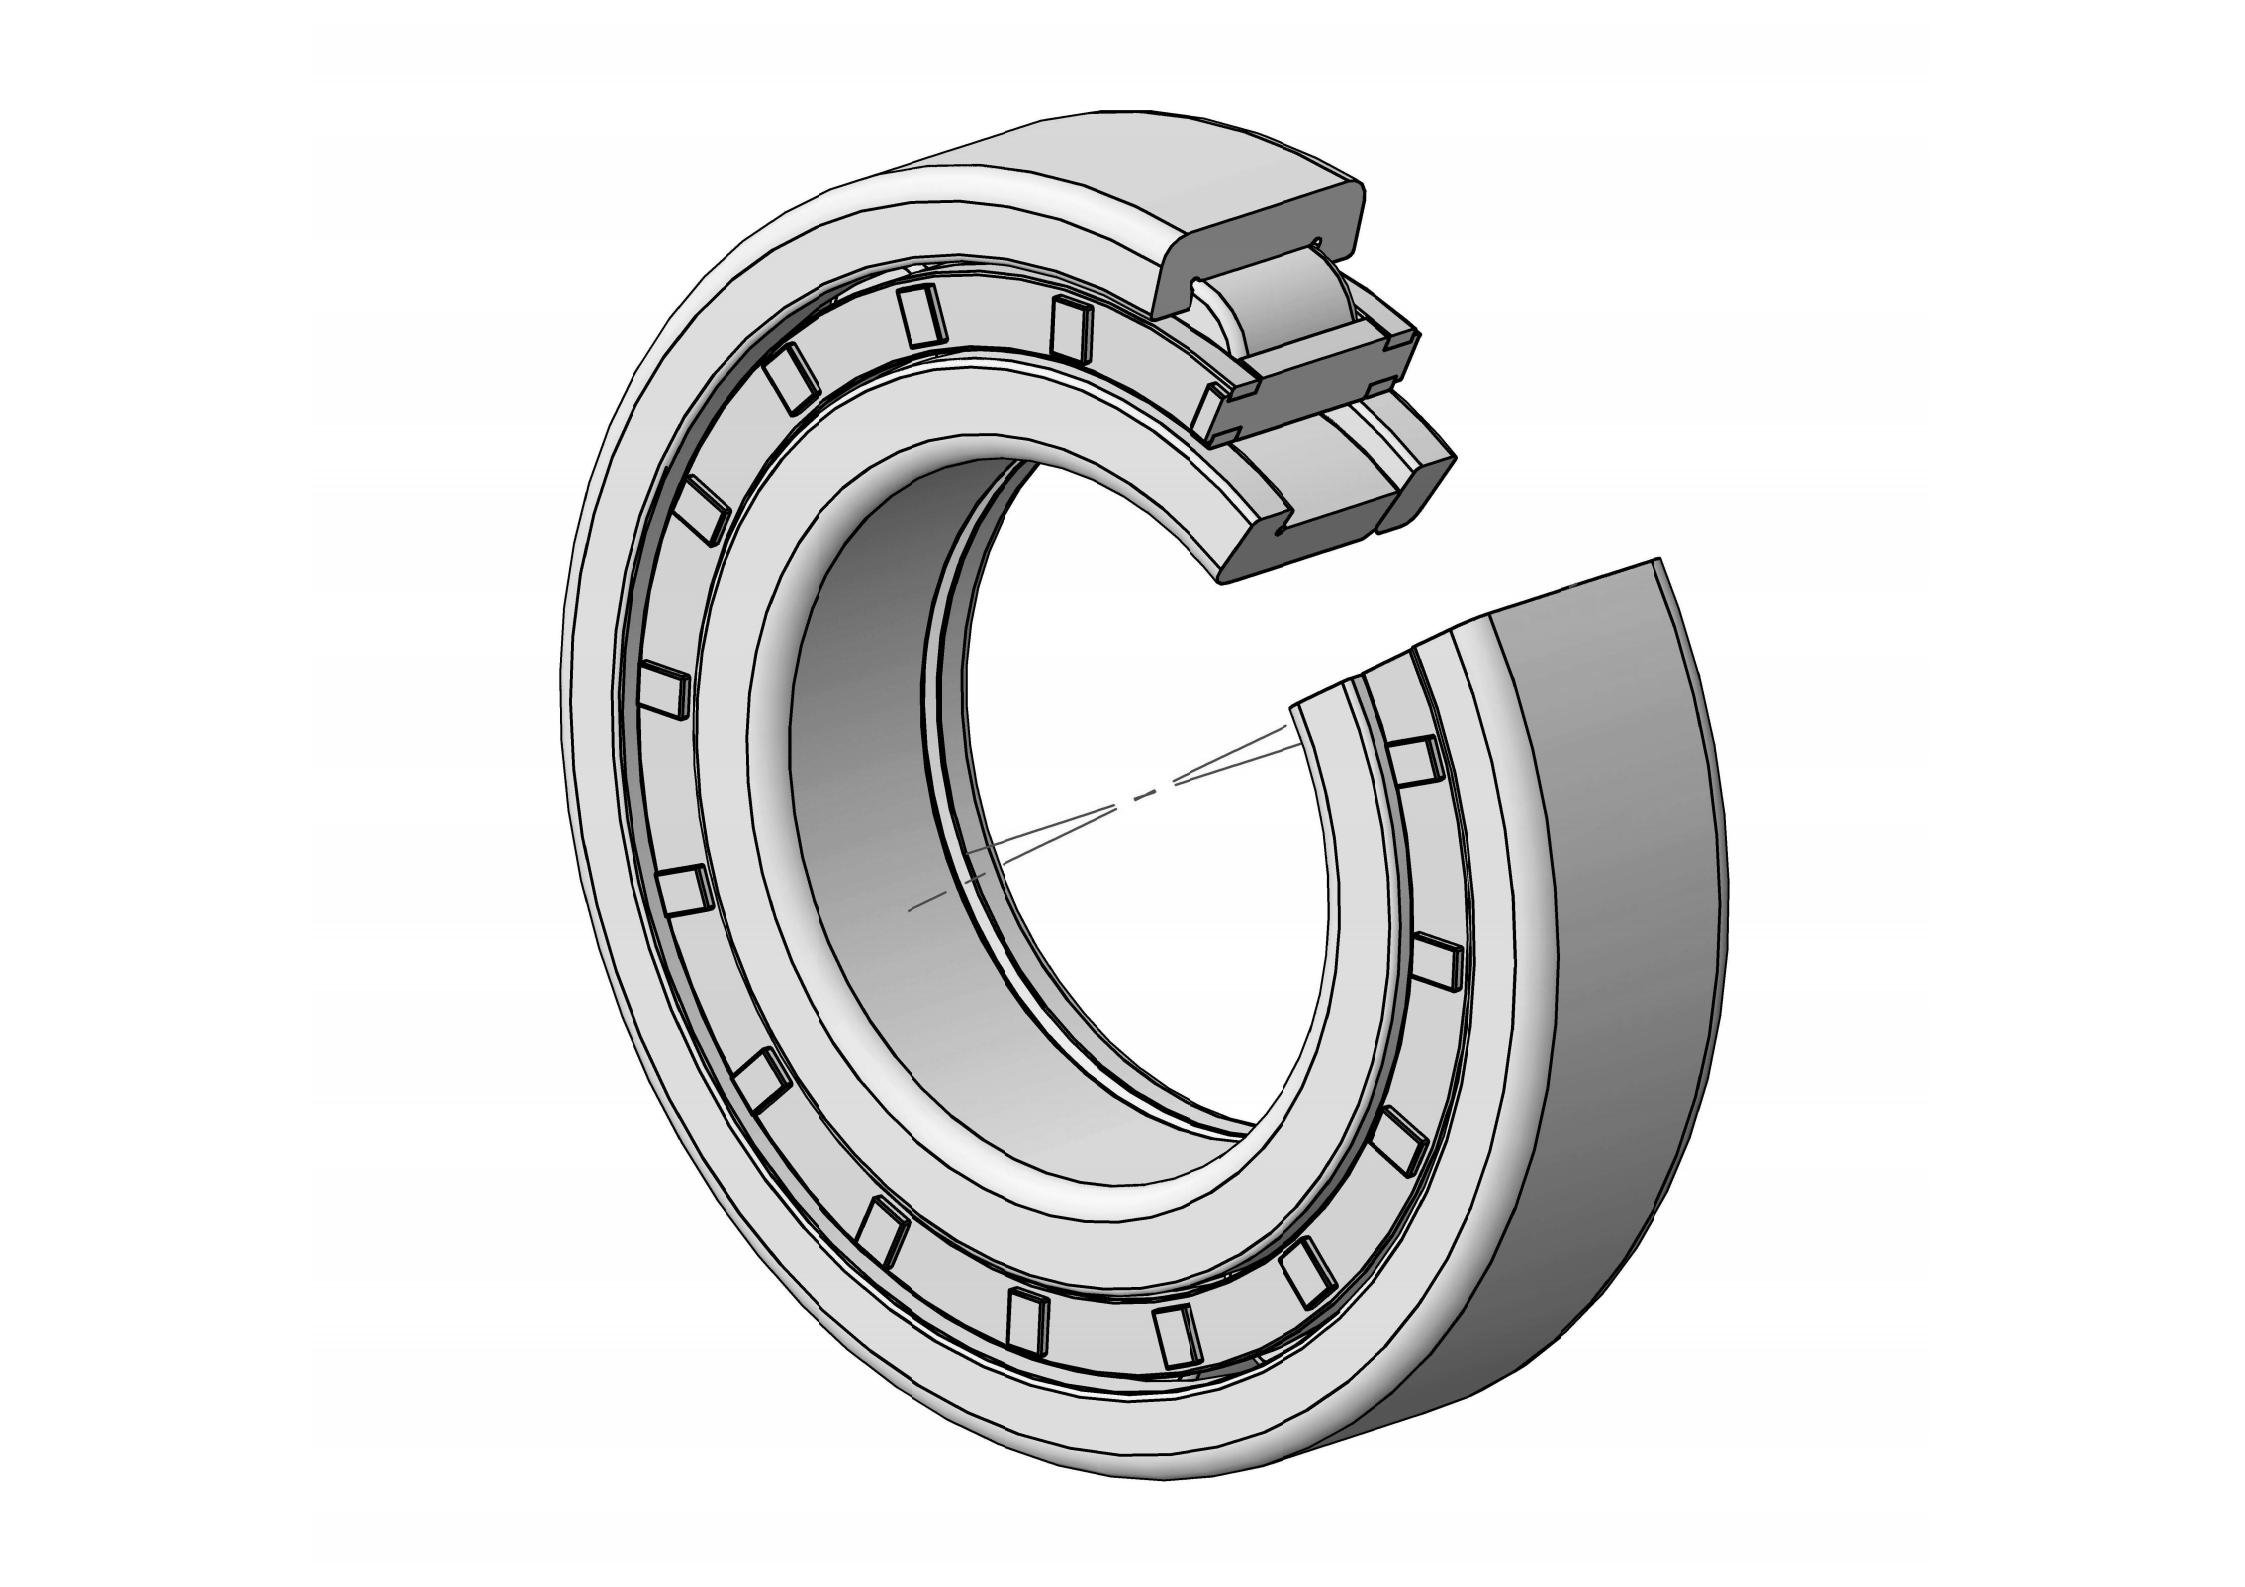 NUP2206-E Single Row Cylindrical roller bearing 